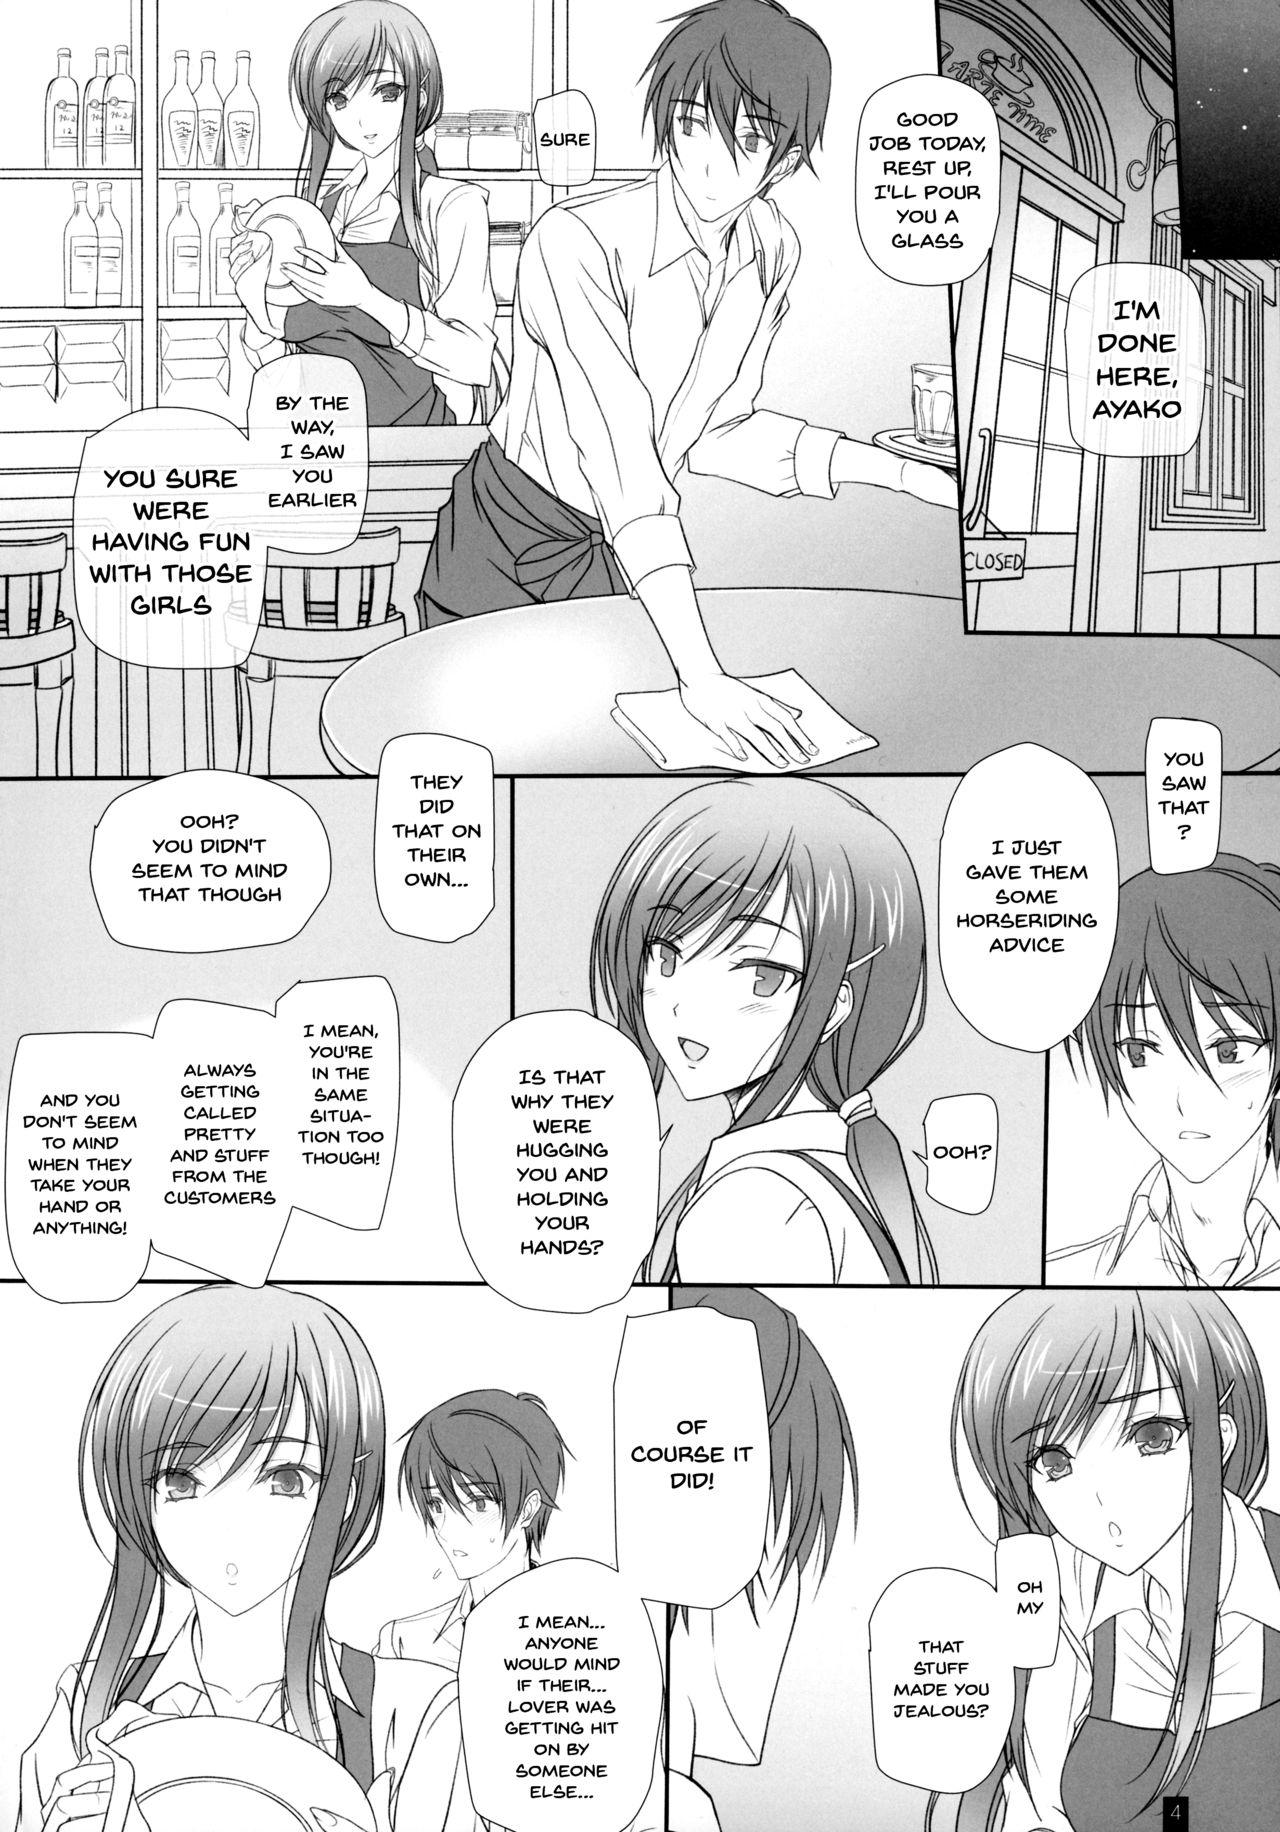 Publico Oh! Ayako! More!&More!! - Walkure romanze Holes - Page 3